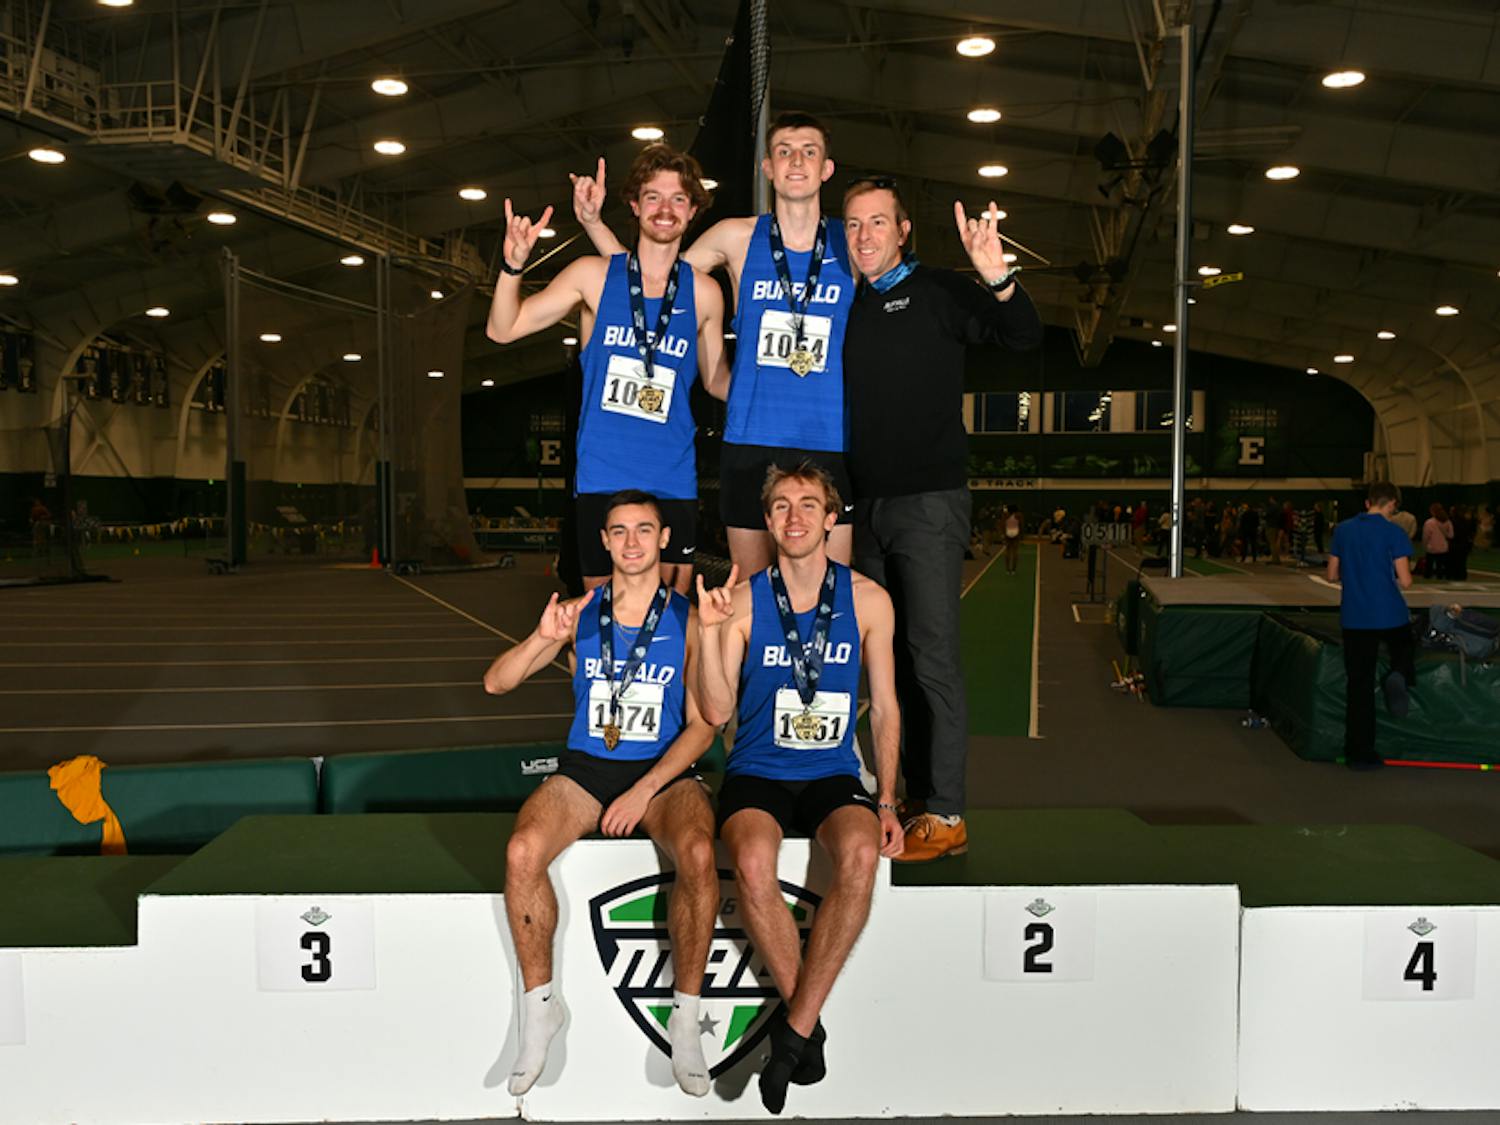 UB claimed first in the men’s 4000m DMR, narrowly edging out Kent State by two seconds with a time of 9:56.10.&nbsp;